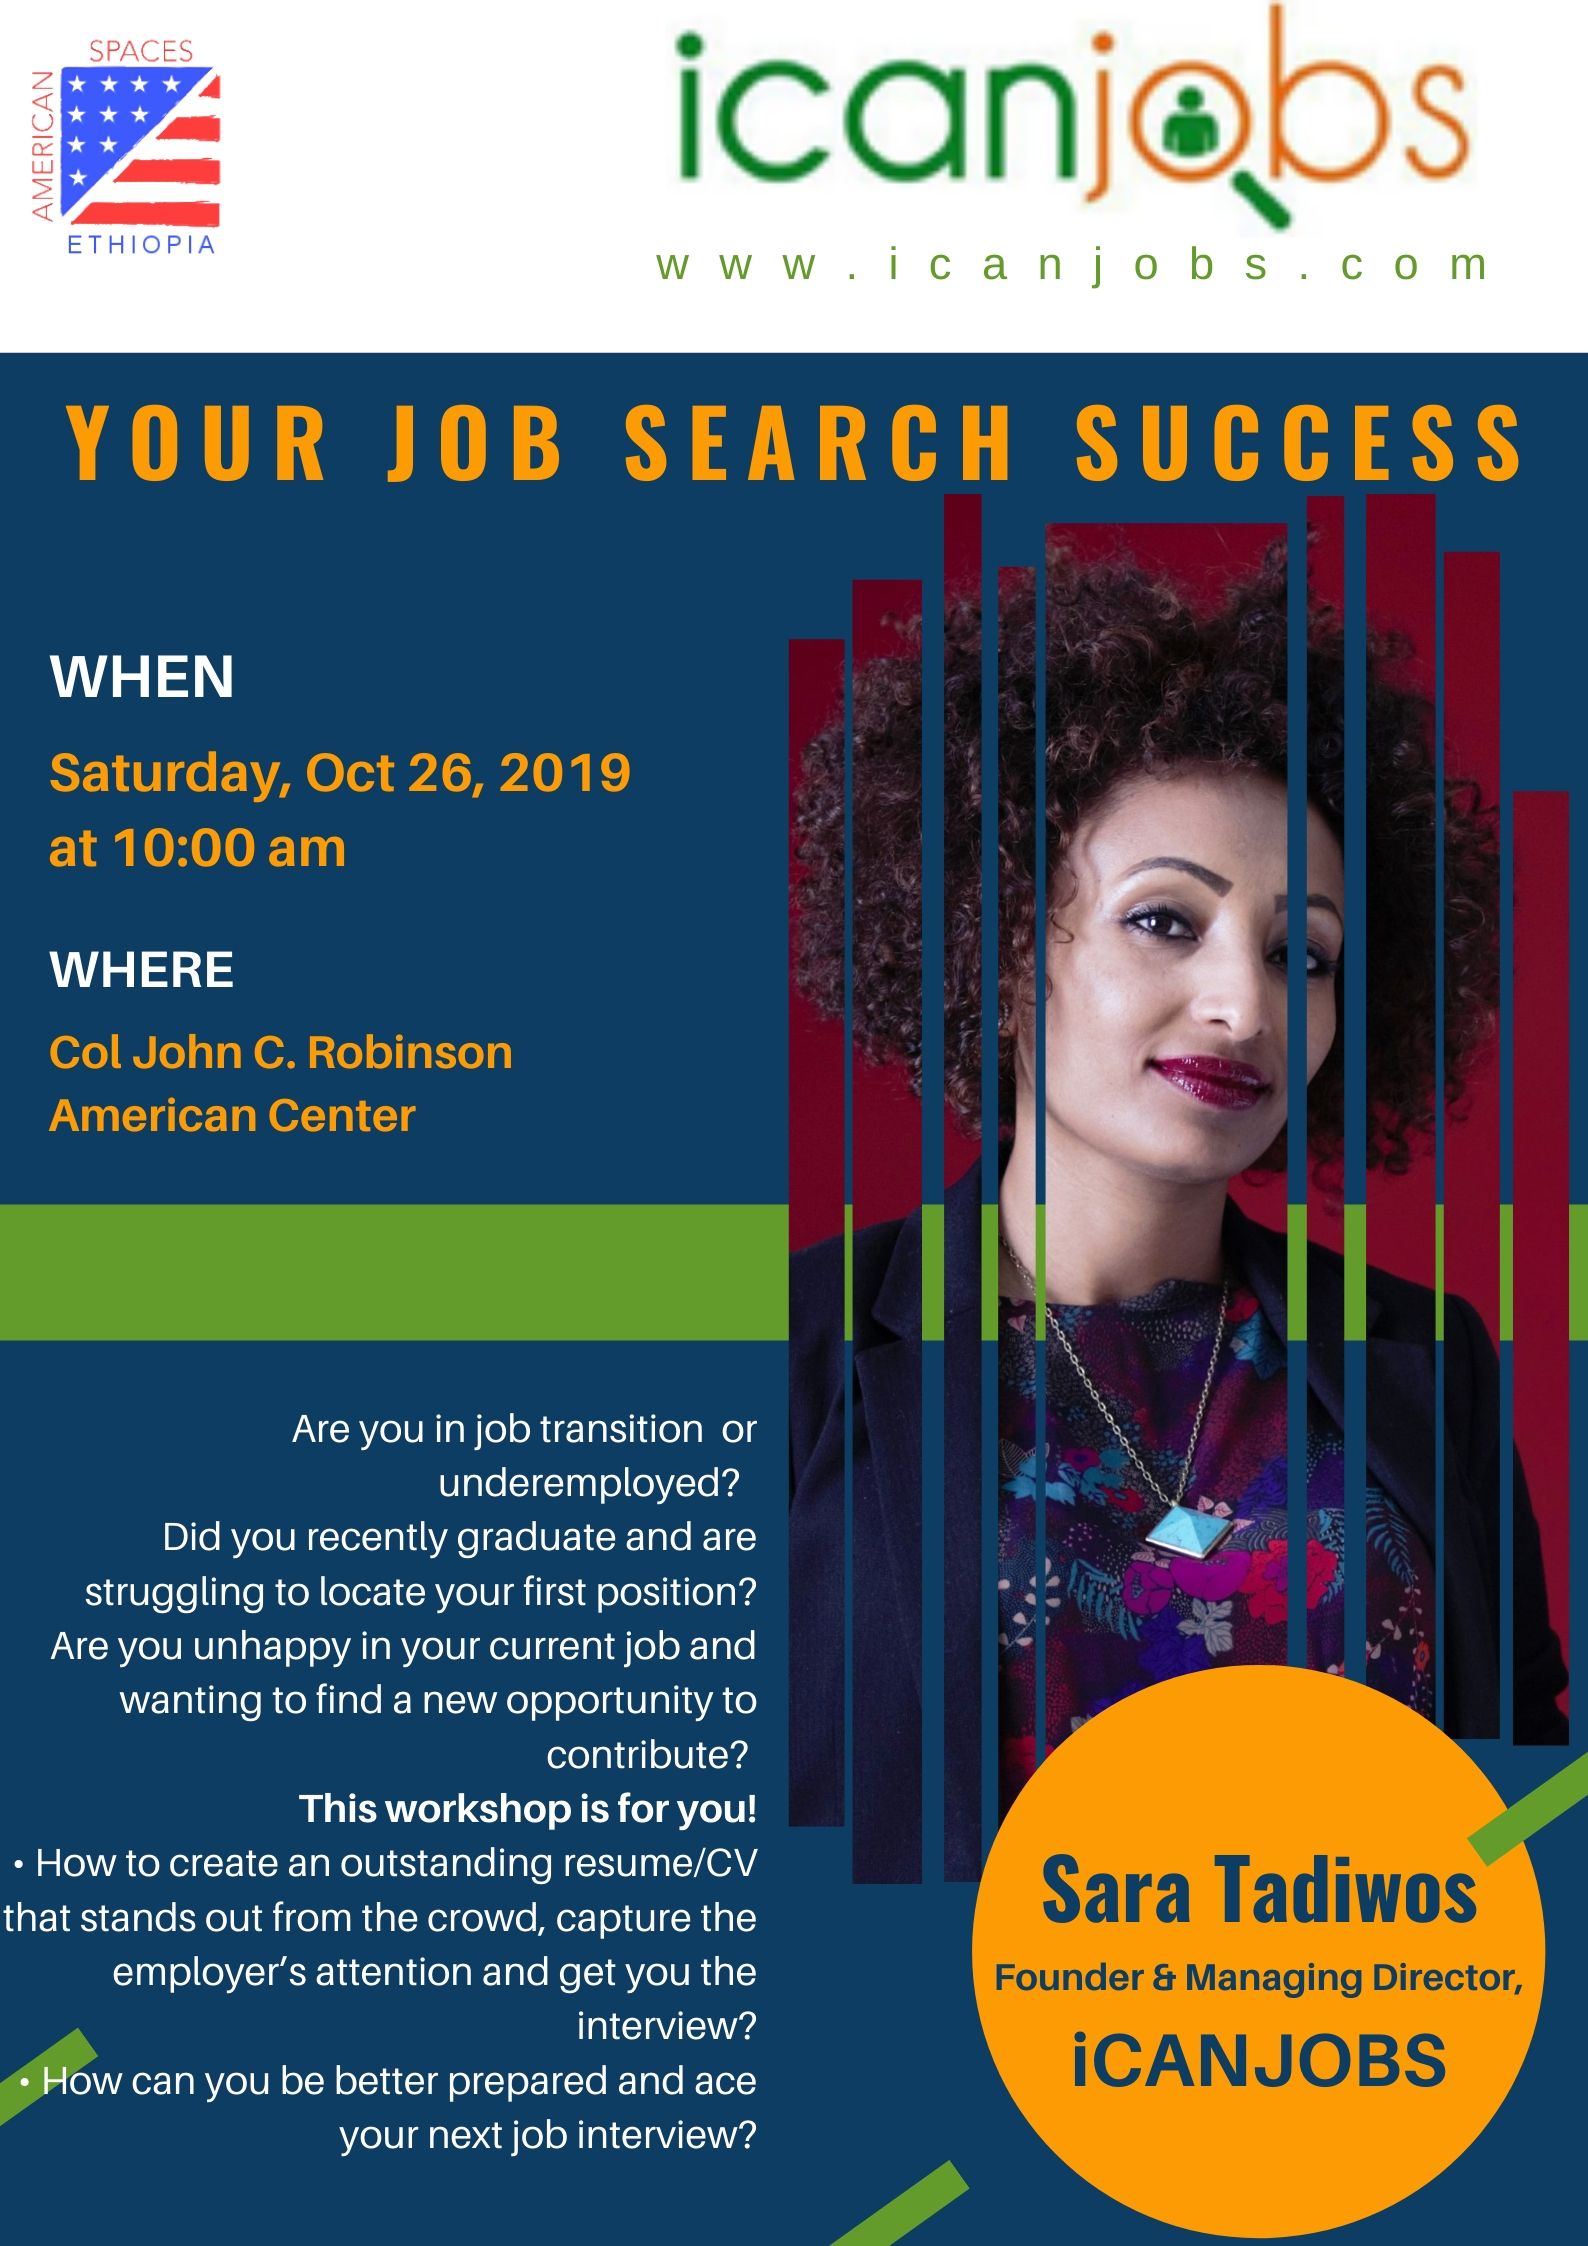 YOUR JOB SEARCH SUCCESS